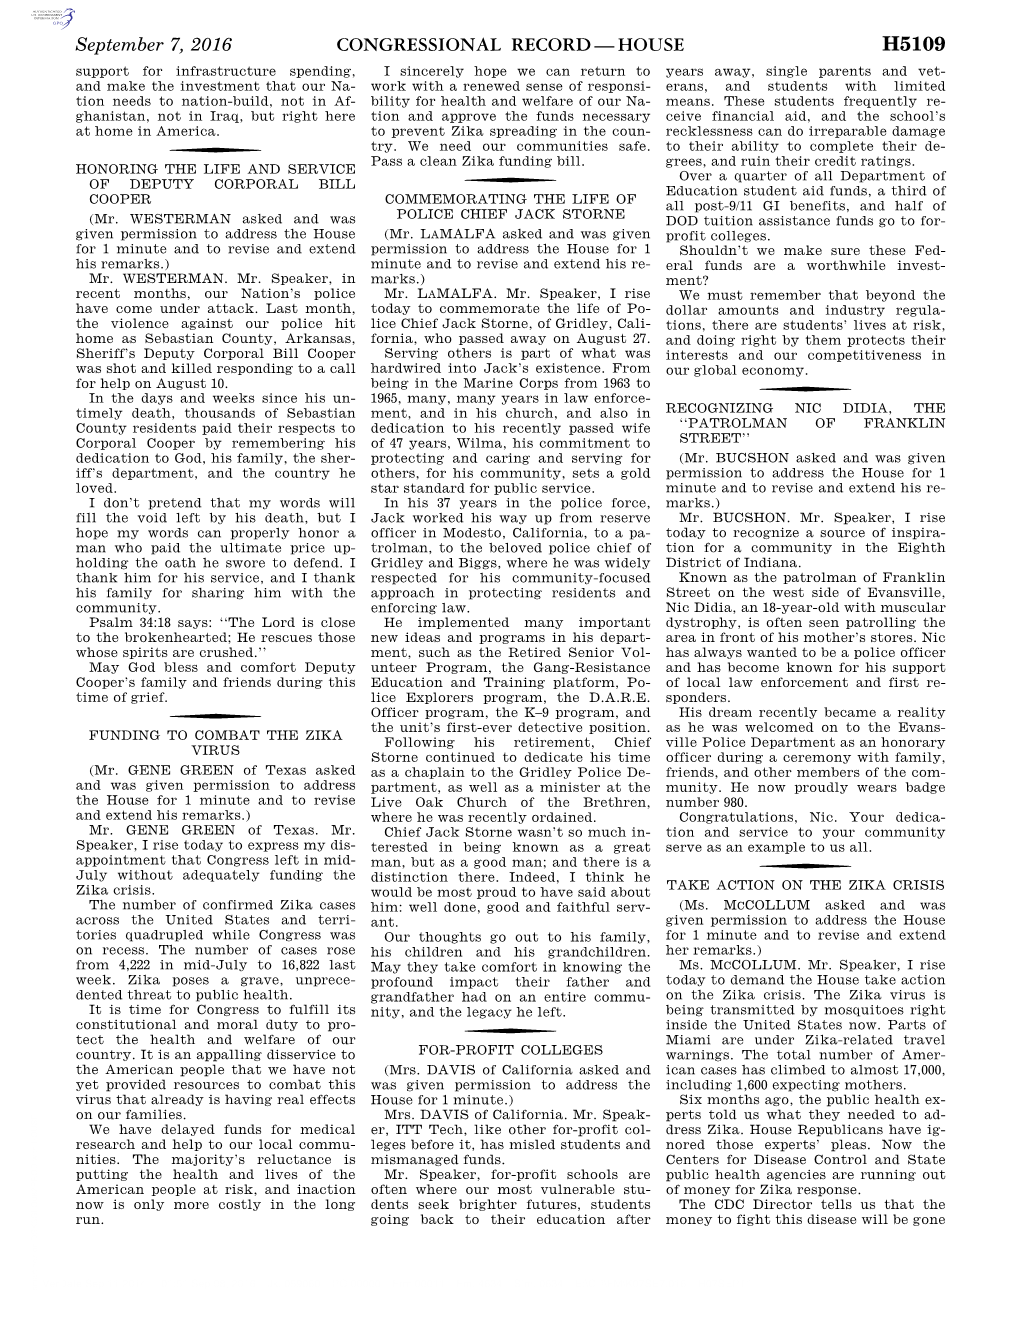 Congressional Record—House H5109